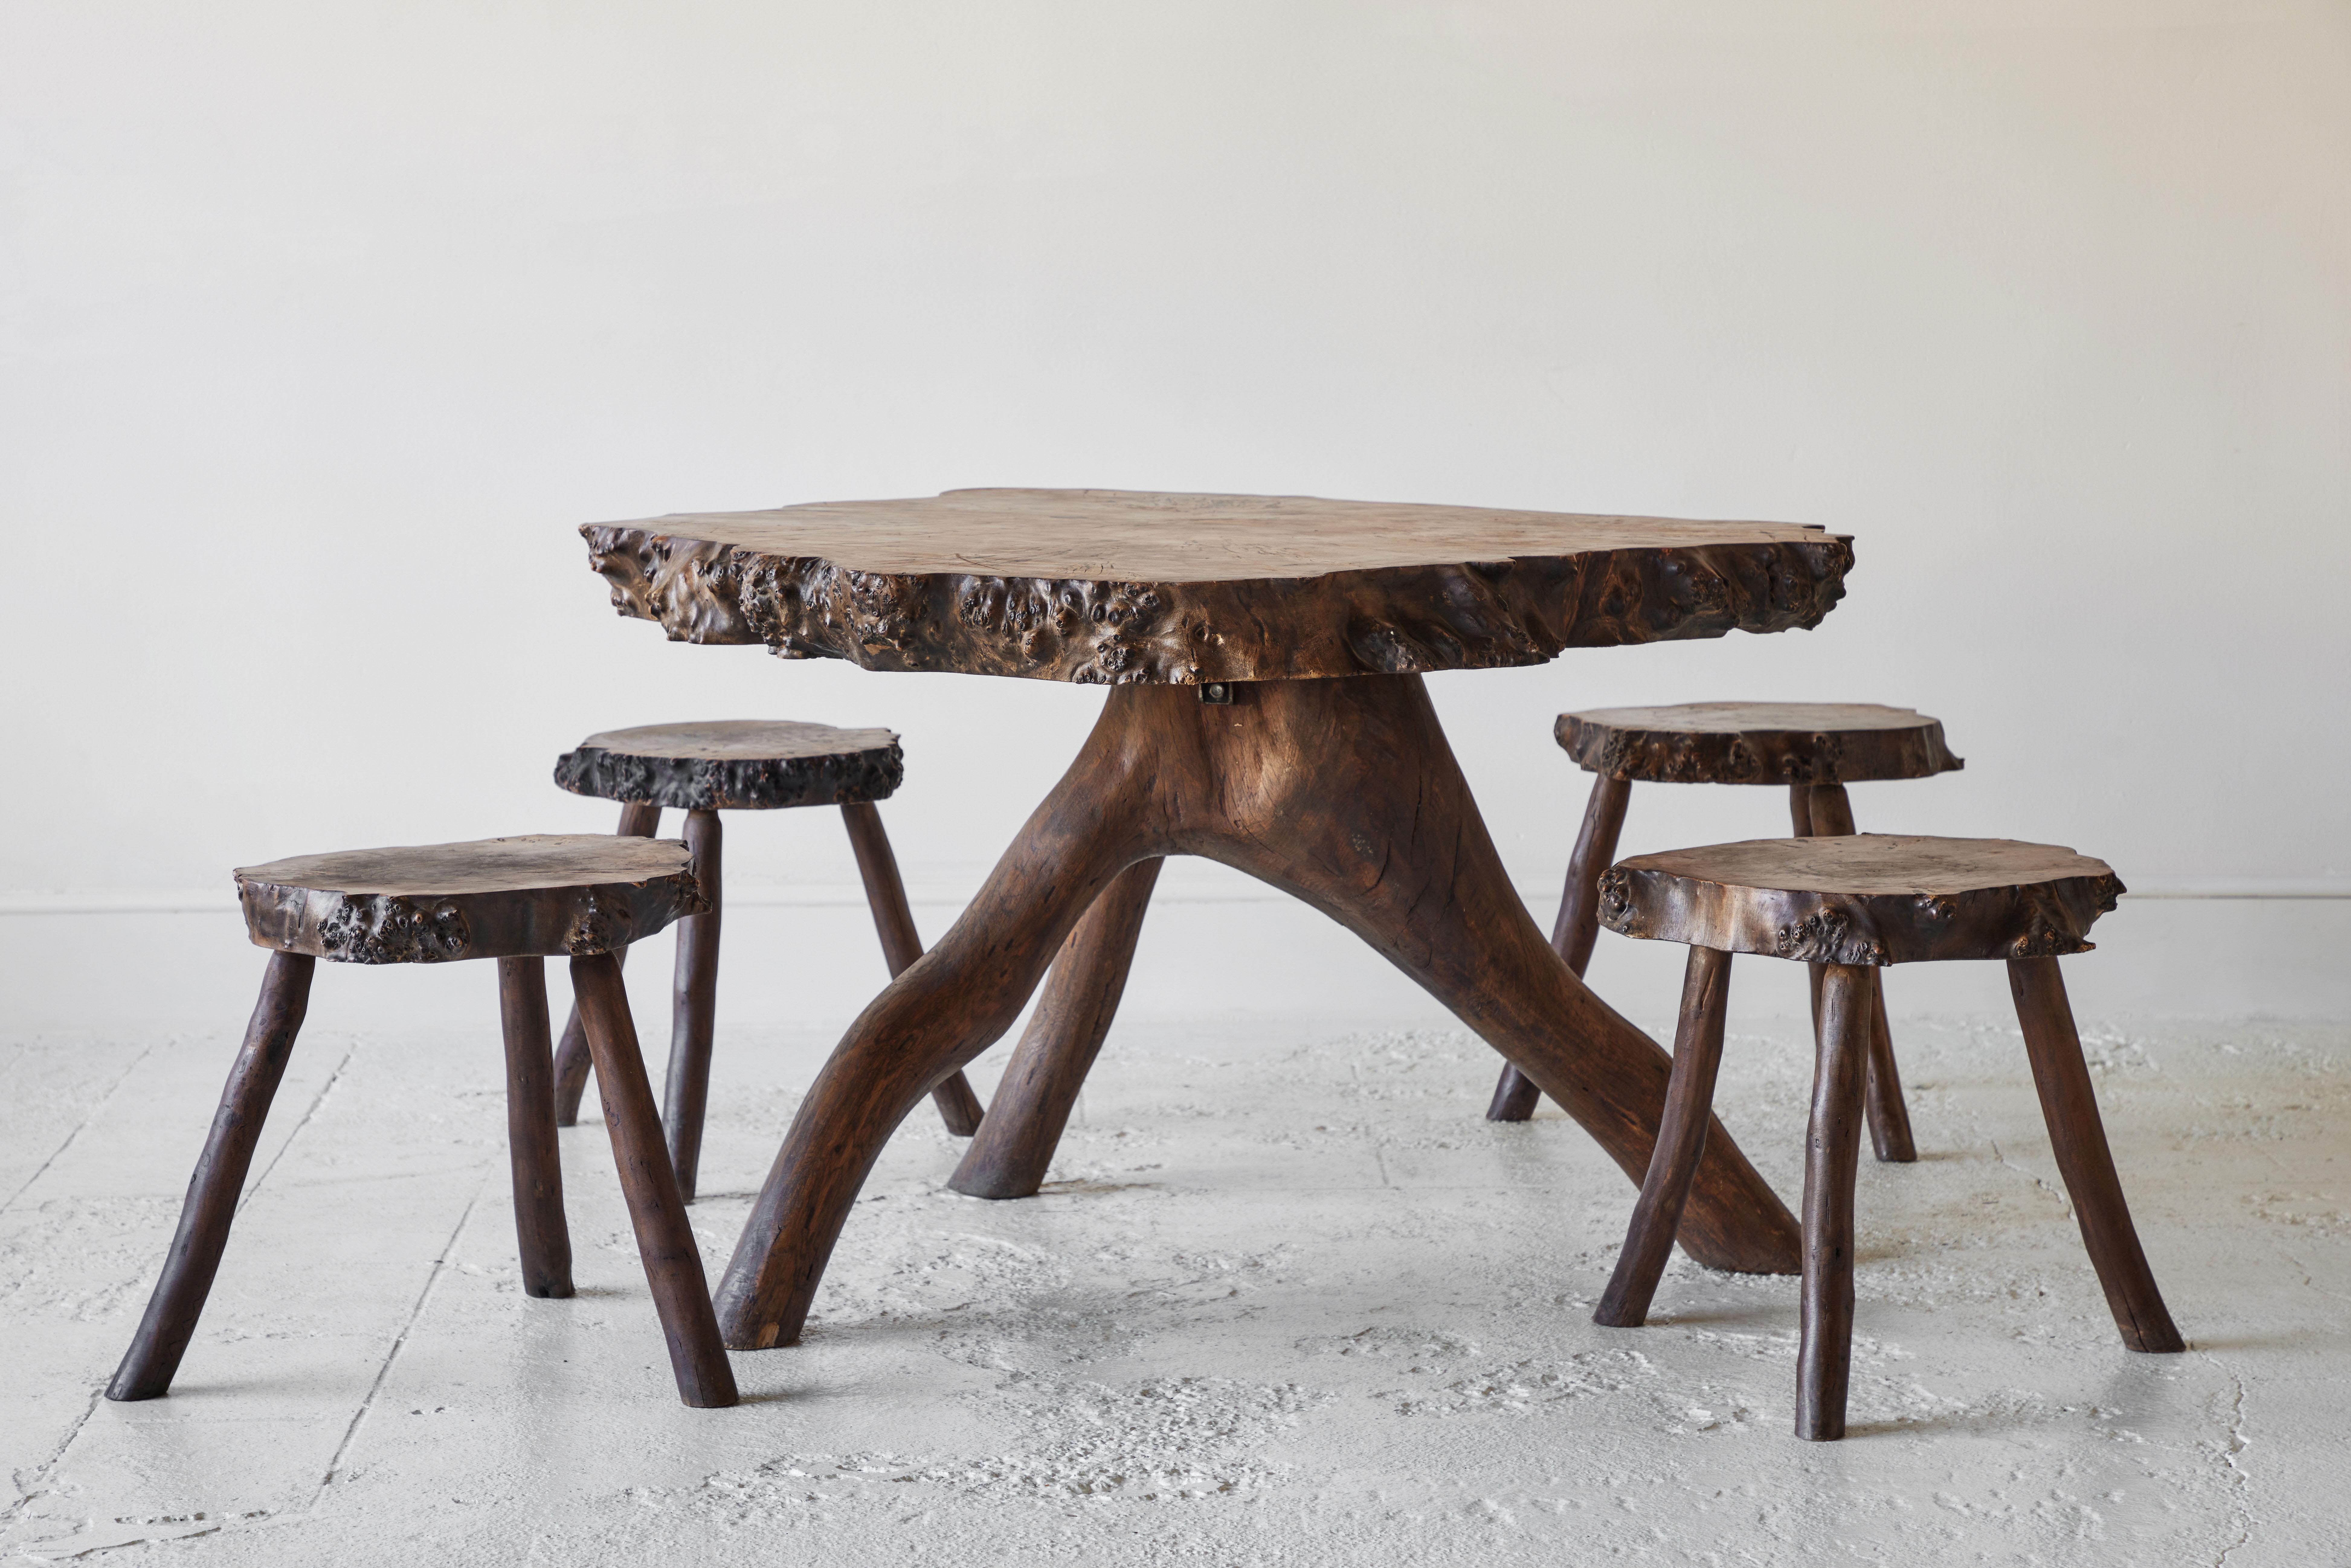 Beautiful rustic root table with a live edge top. The table comes with four matching stools.